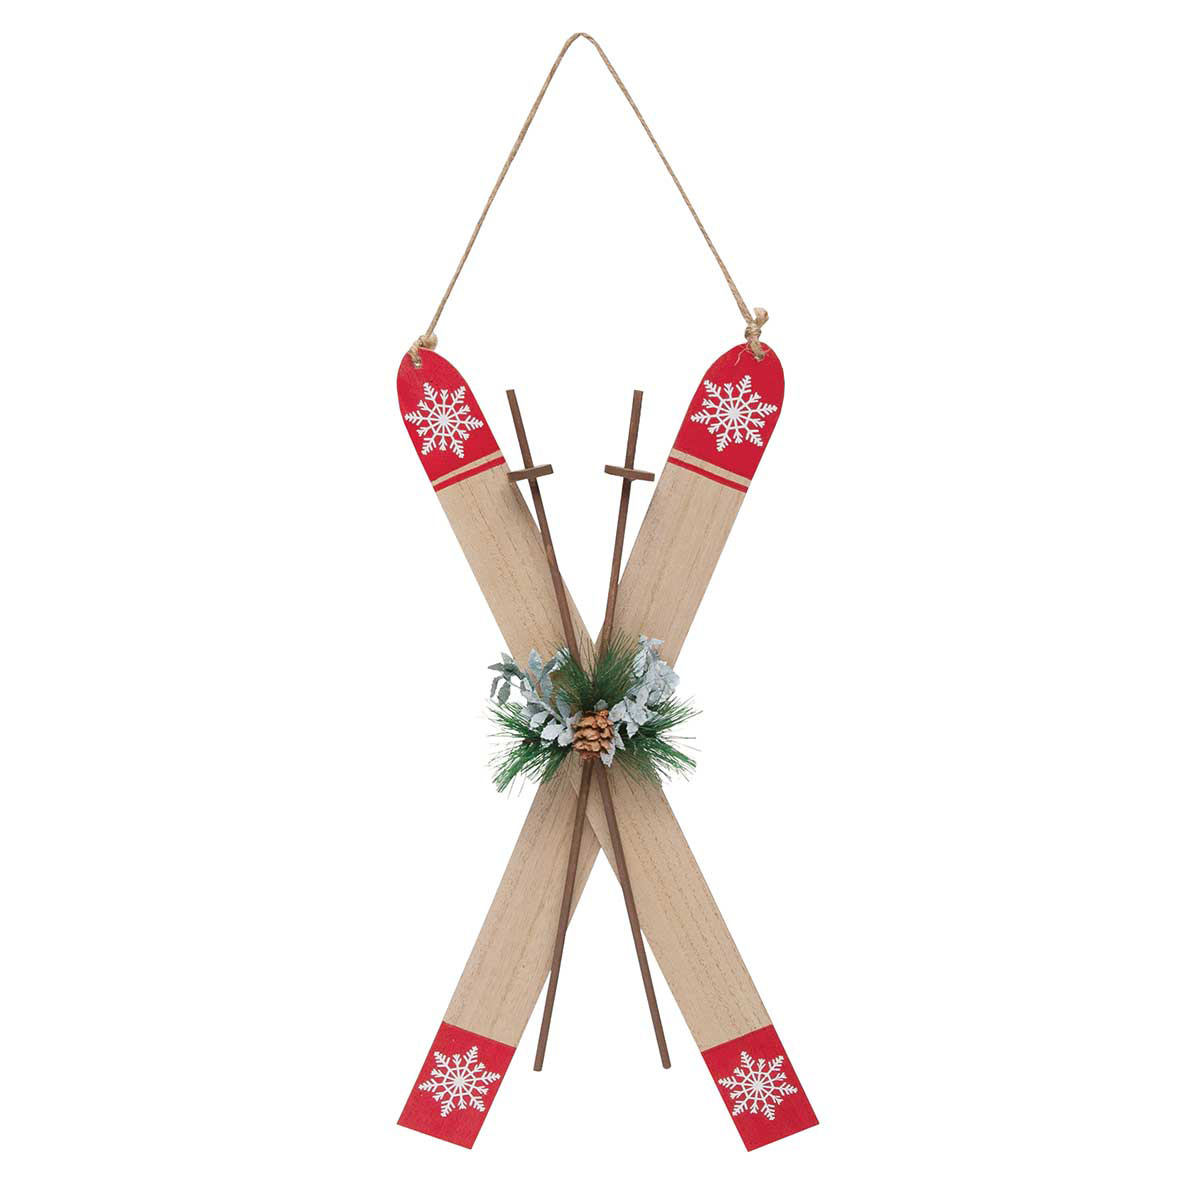 ORNAMENT SKI SET RED/NATURAL 7.5IN X 14IN WOOD